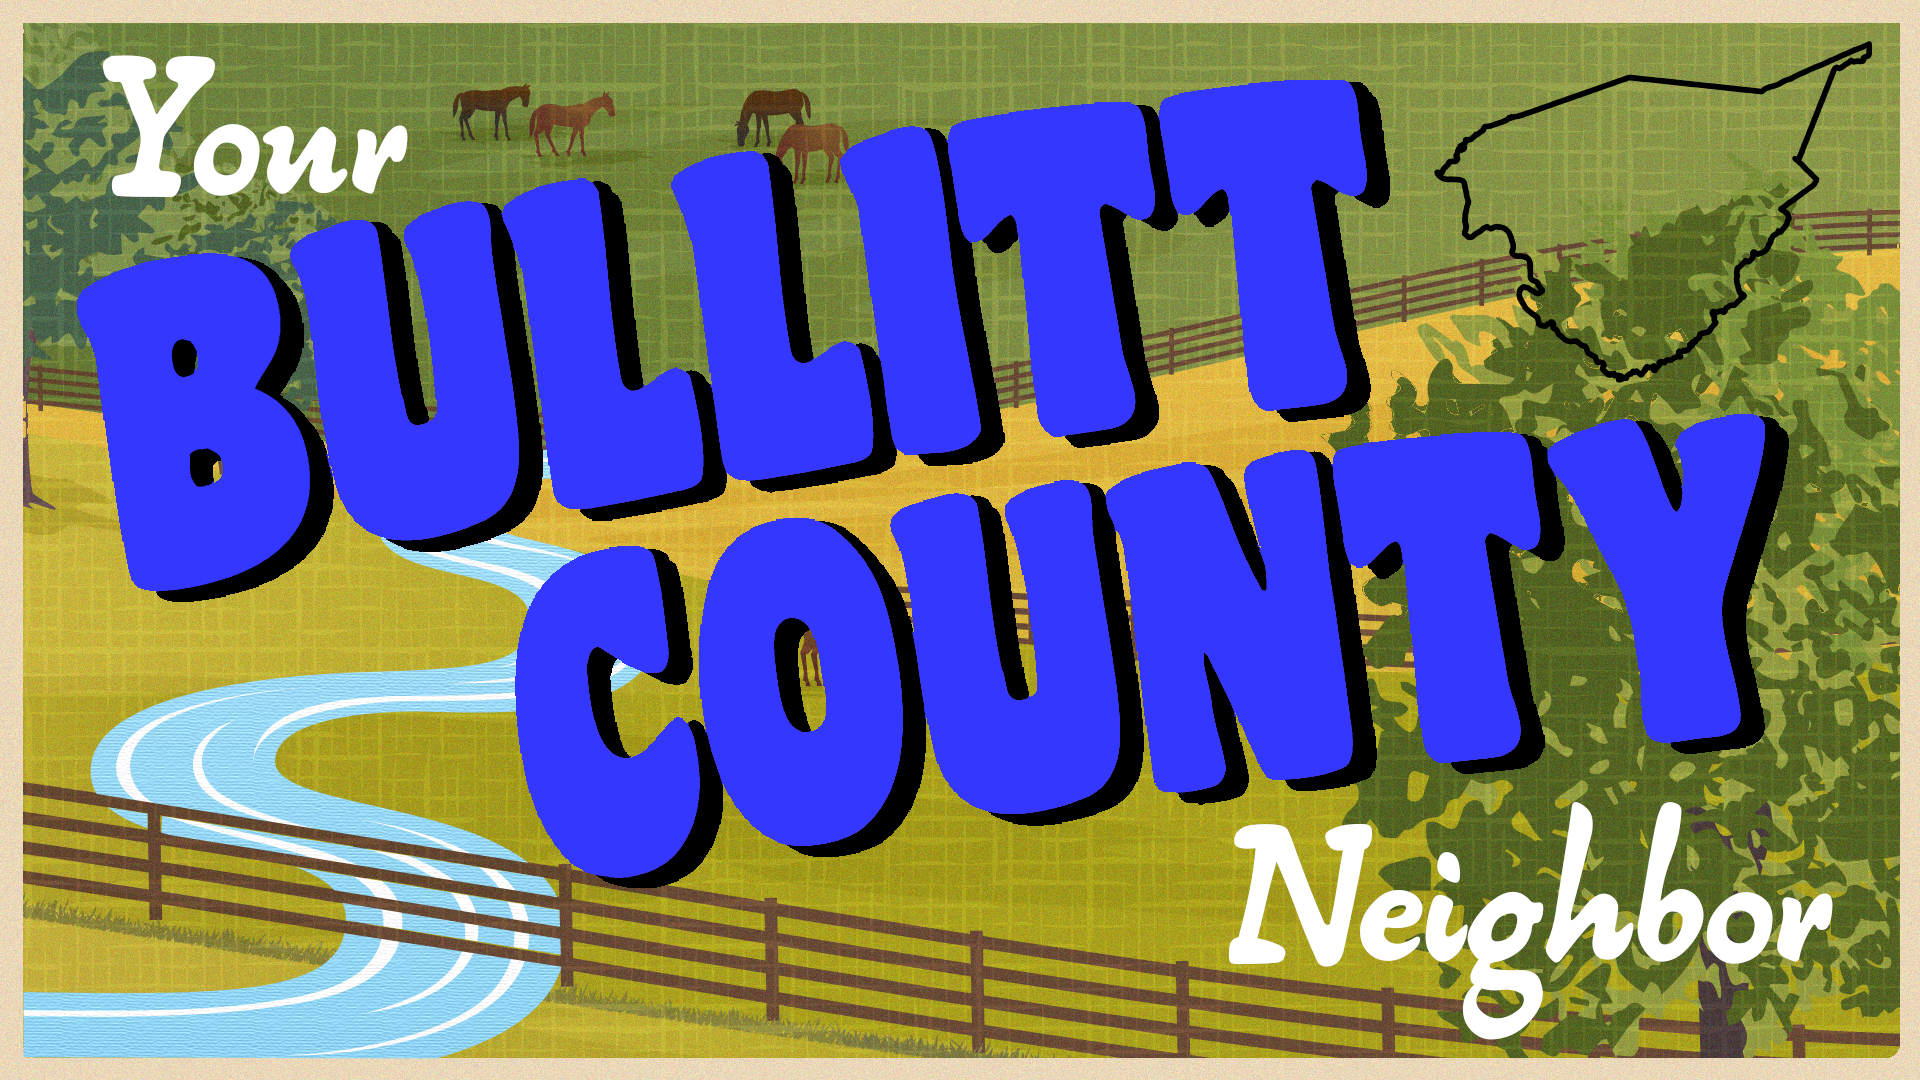 Image reads "Your Bullitt County Neighbor" against a rolling green hills background. There is a river behind the title on the left side of the image and an outline of Bullitt County in the top right corner.